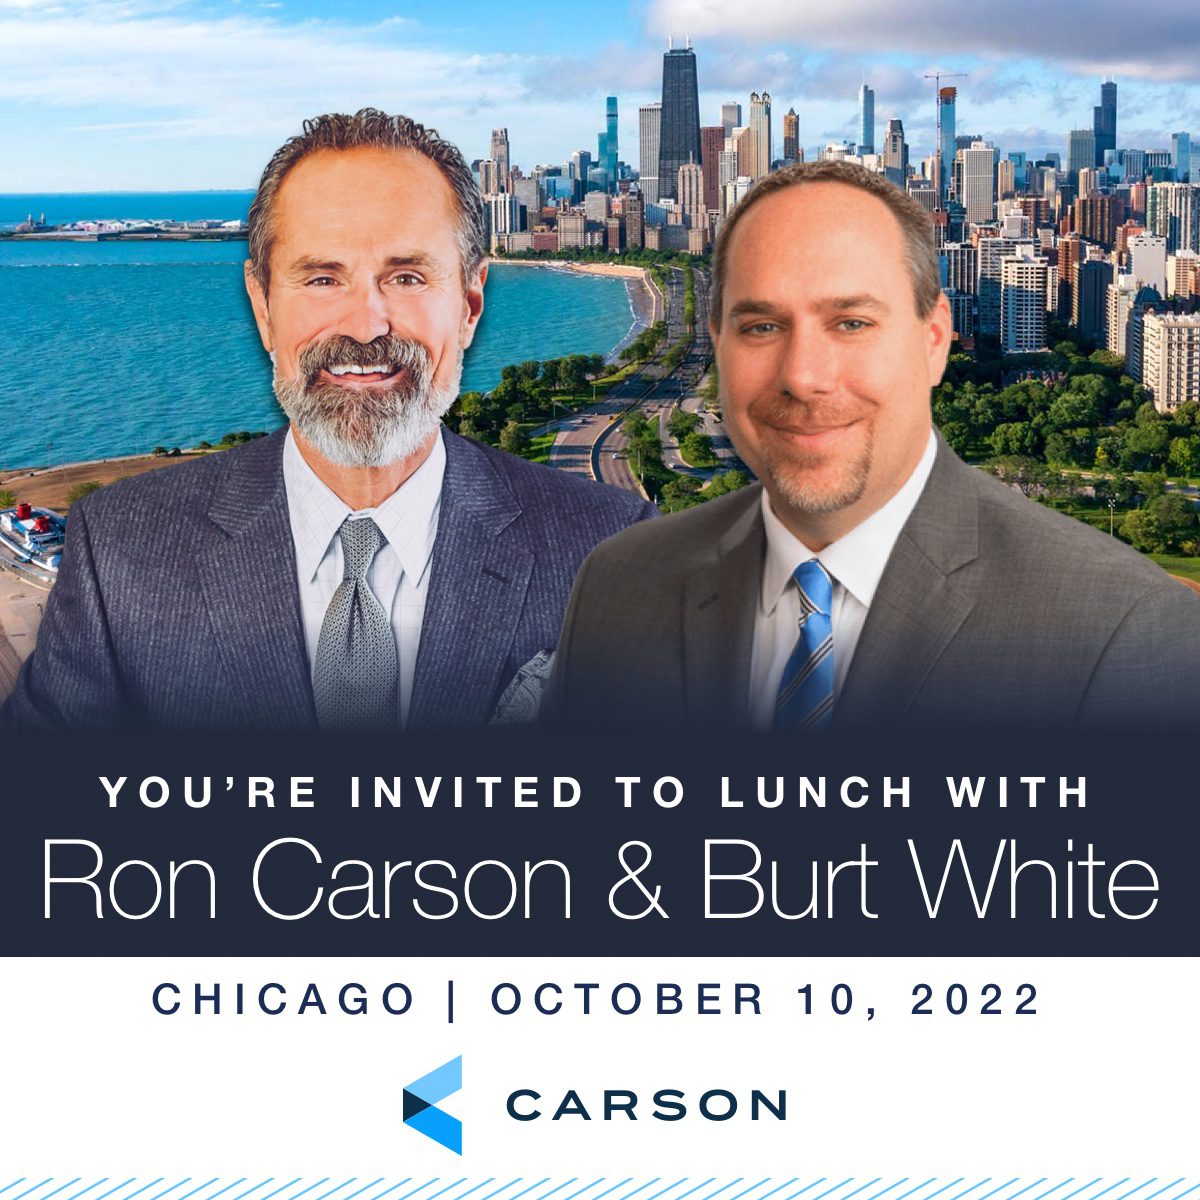 Join Ron Carson and Burt White for Lunch in Chicago